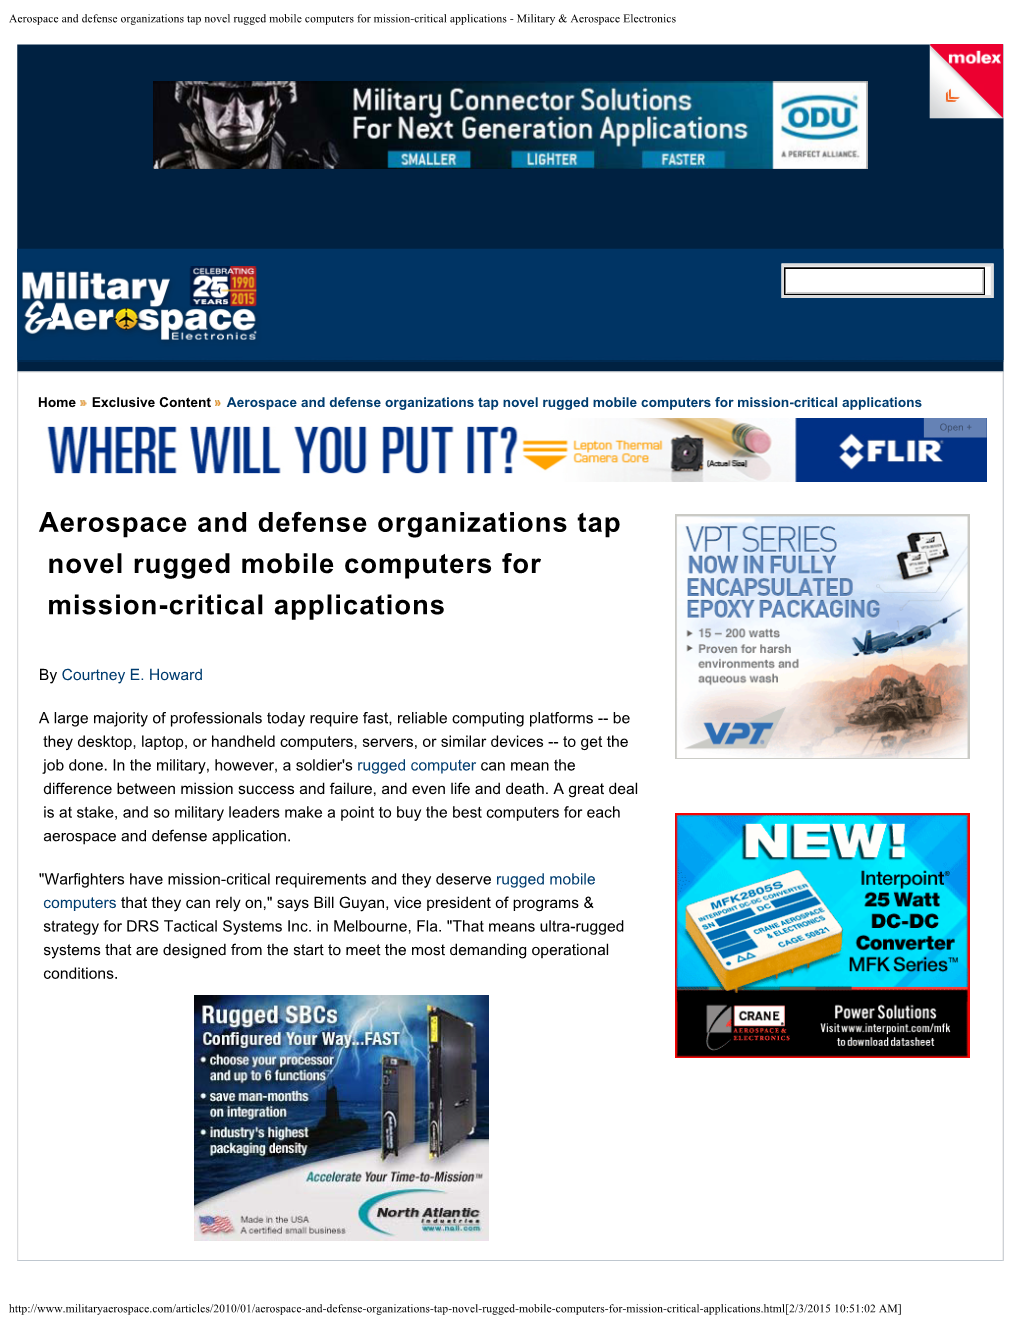 Aerospace and Defense Organizations Tap Novel Rugged Mobile Computers for Mission-Critical Applications - Military & Aerospace Electronics